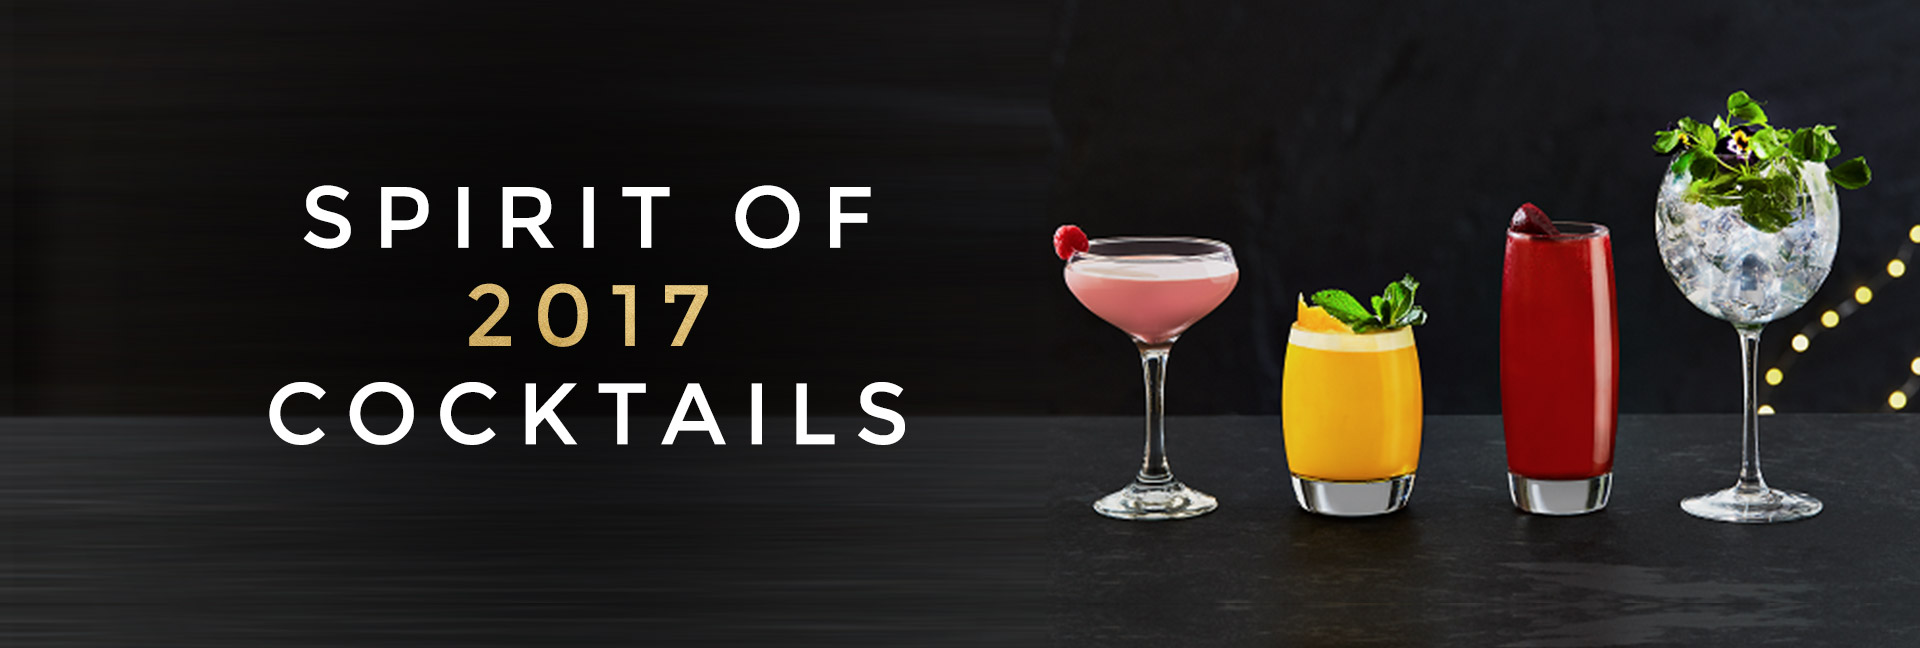 Spirit of 2017 cocktails at All Bar One Brindleyplace